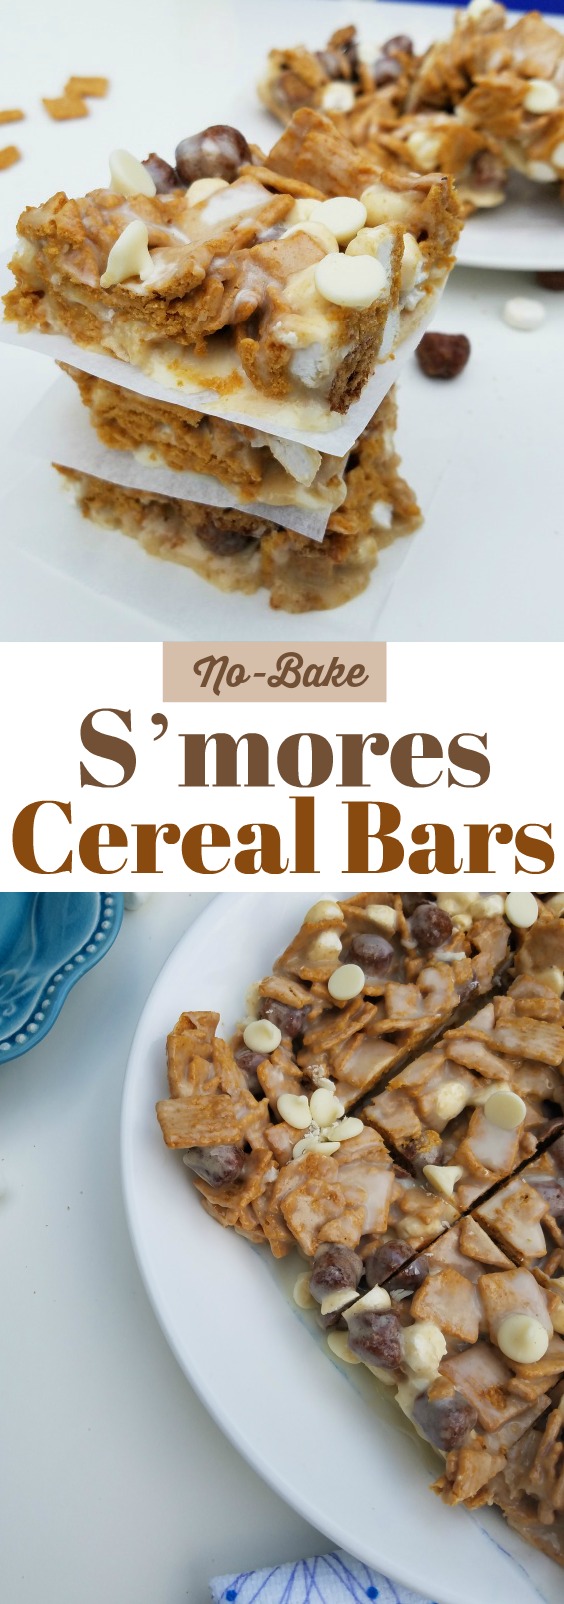 Ooey Gooey No-Bake S'mores Cereal Bars using only 5 ingredients and made with Honey Maid S'mores cereal. Perfectly sweet and so delicious!!